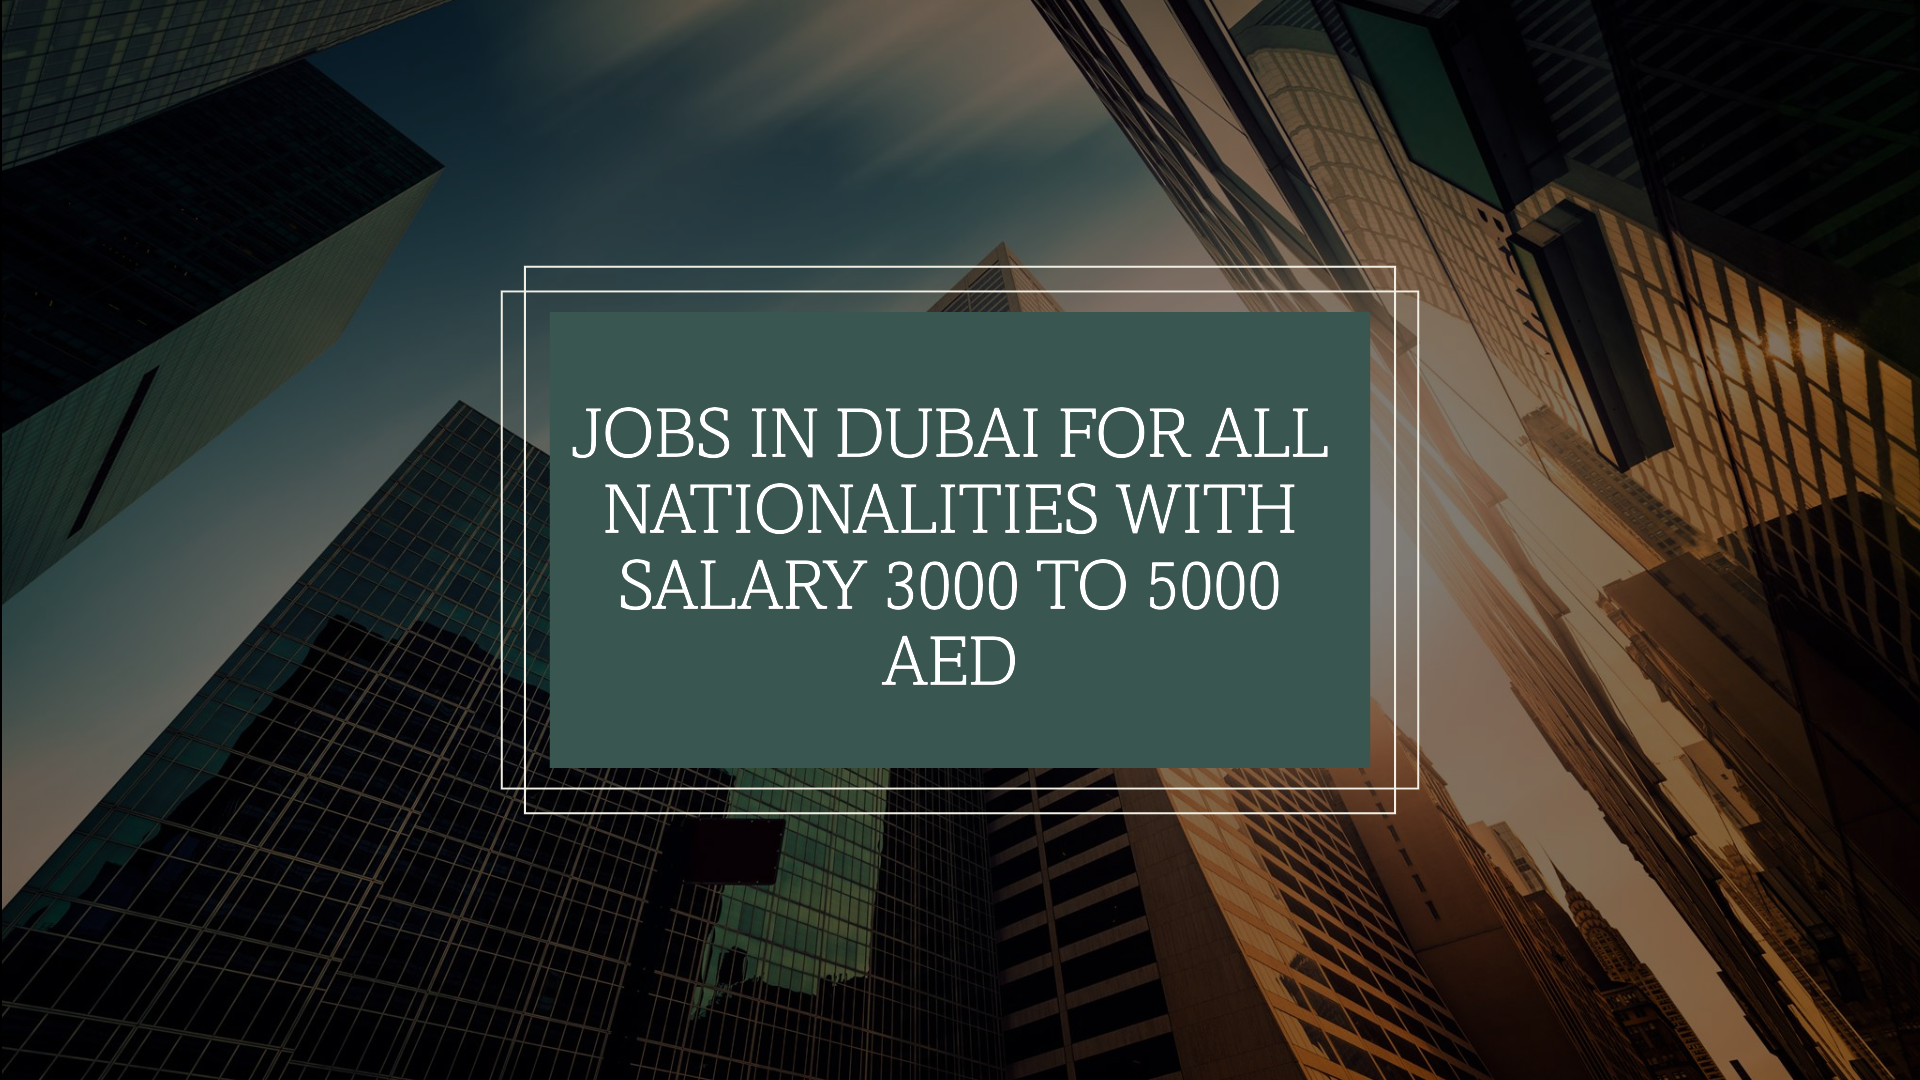 jobs in dubai for all nationalities with salary 3000 to 5000 AED